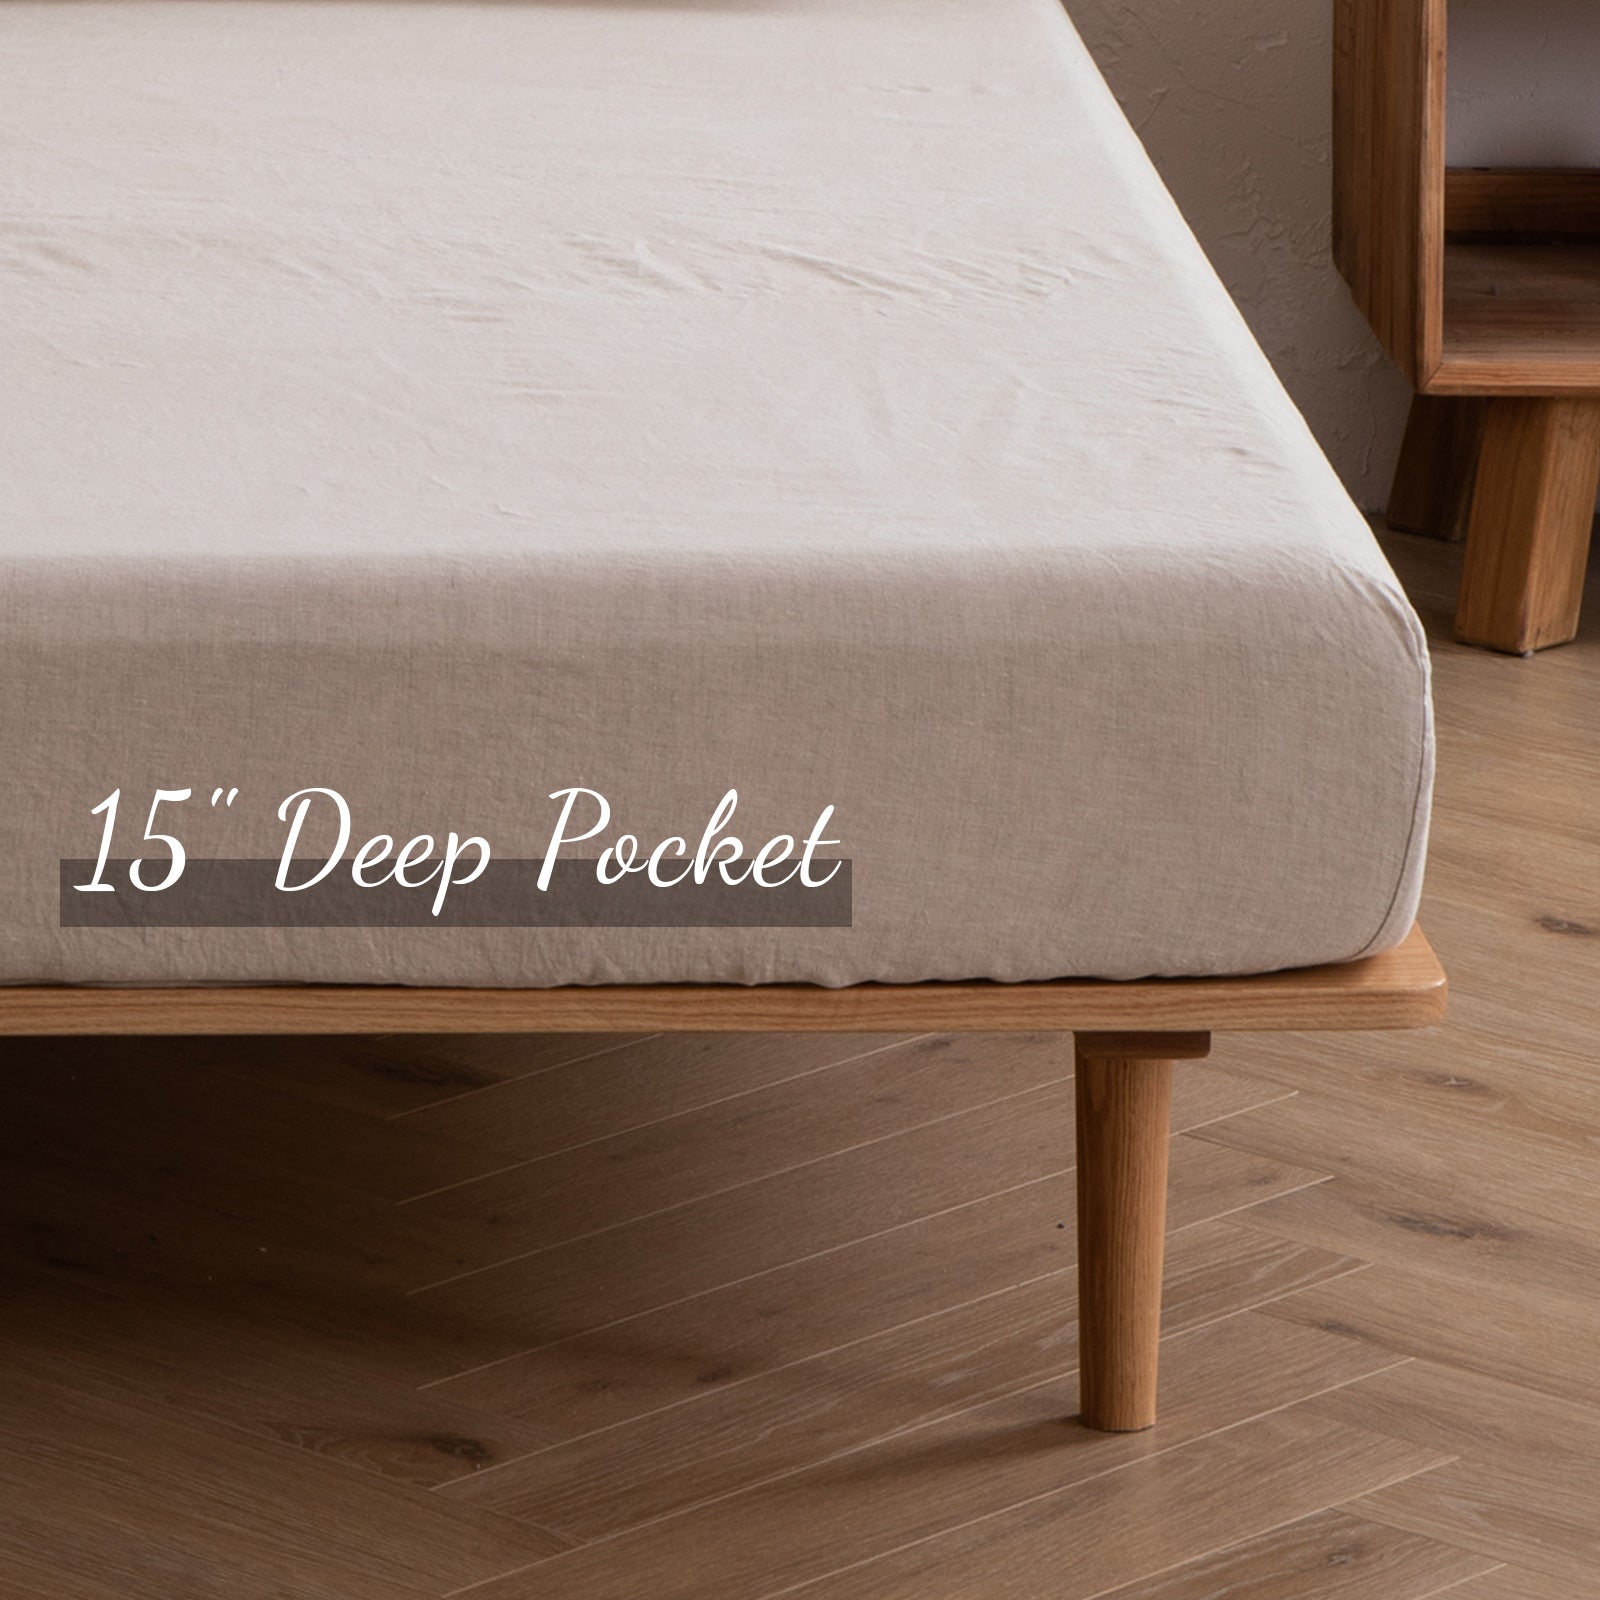 100% Soft Natural French Linen Bedding Fitted Sheet